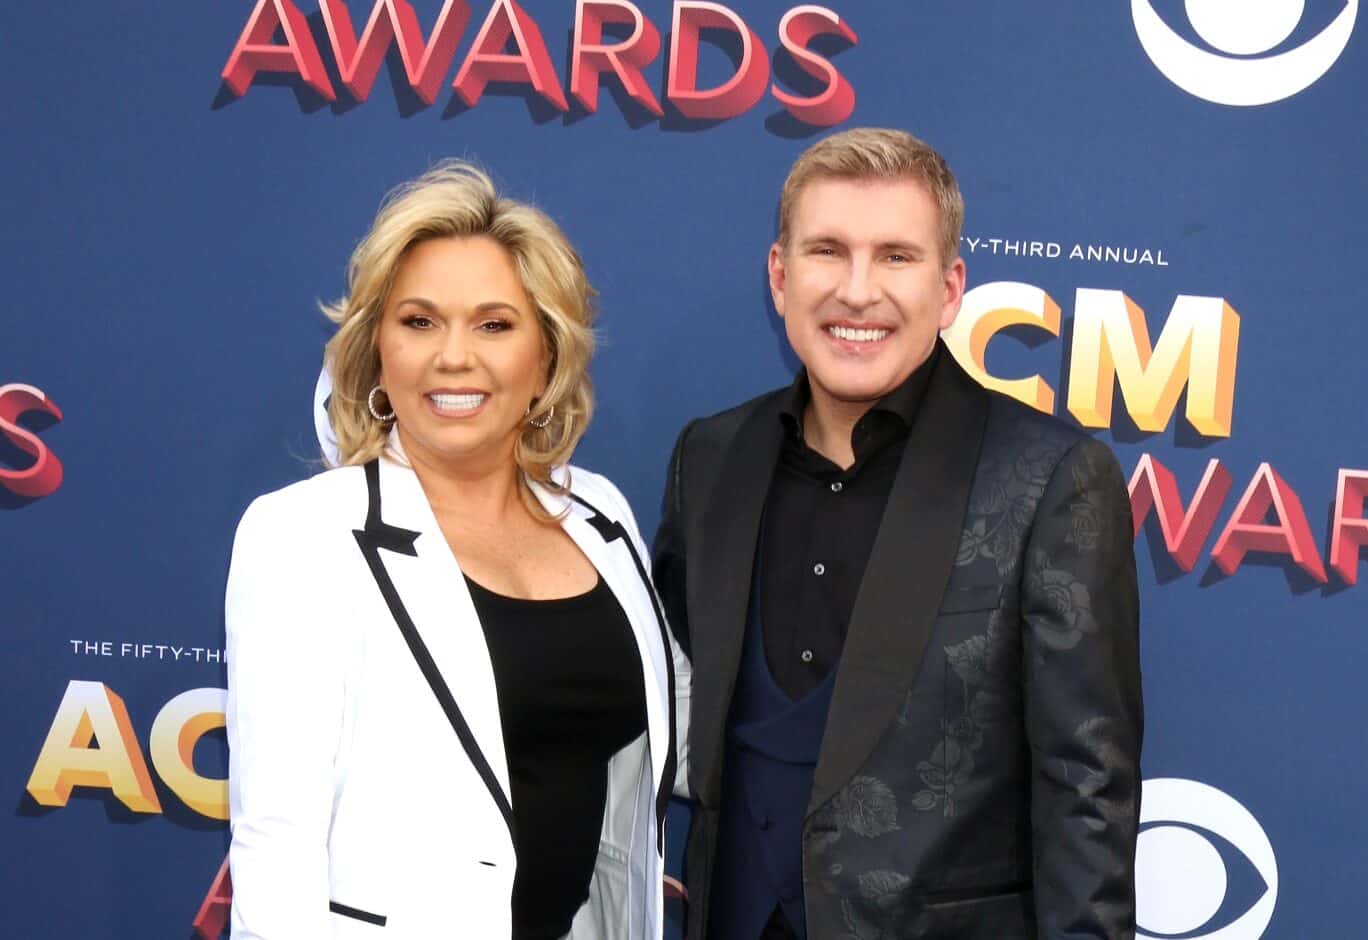 Todd & Julie Chrisley Talk "Fame" Destroying Family & Issues